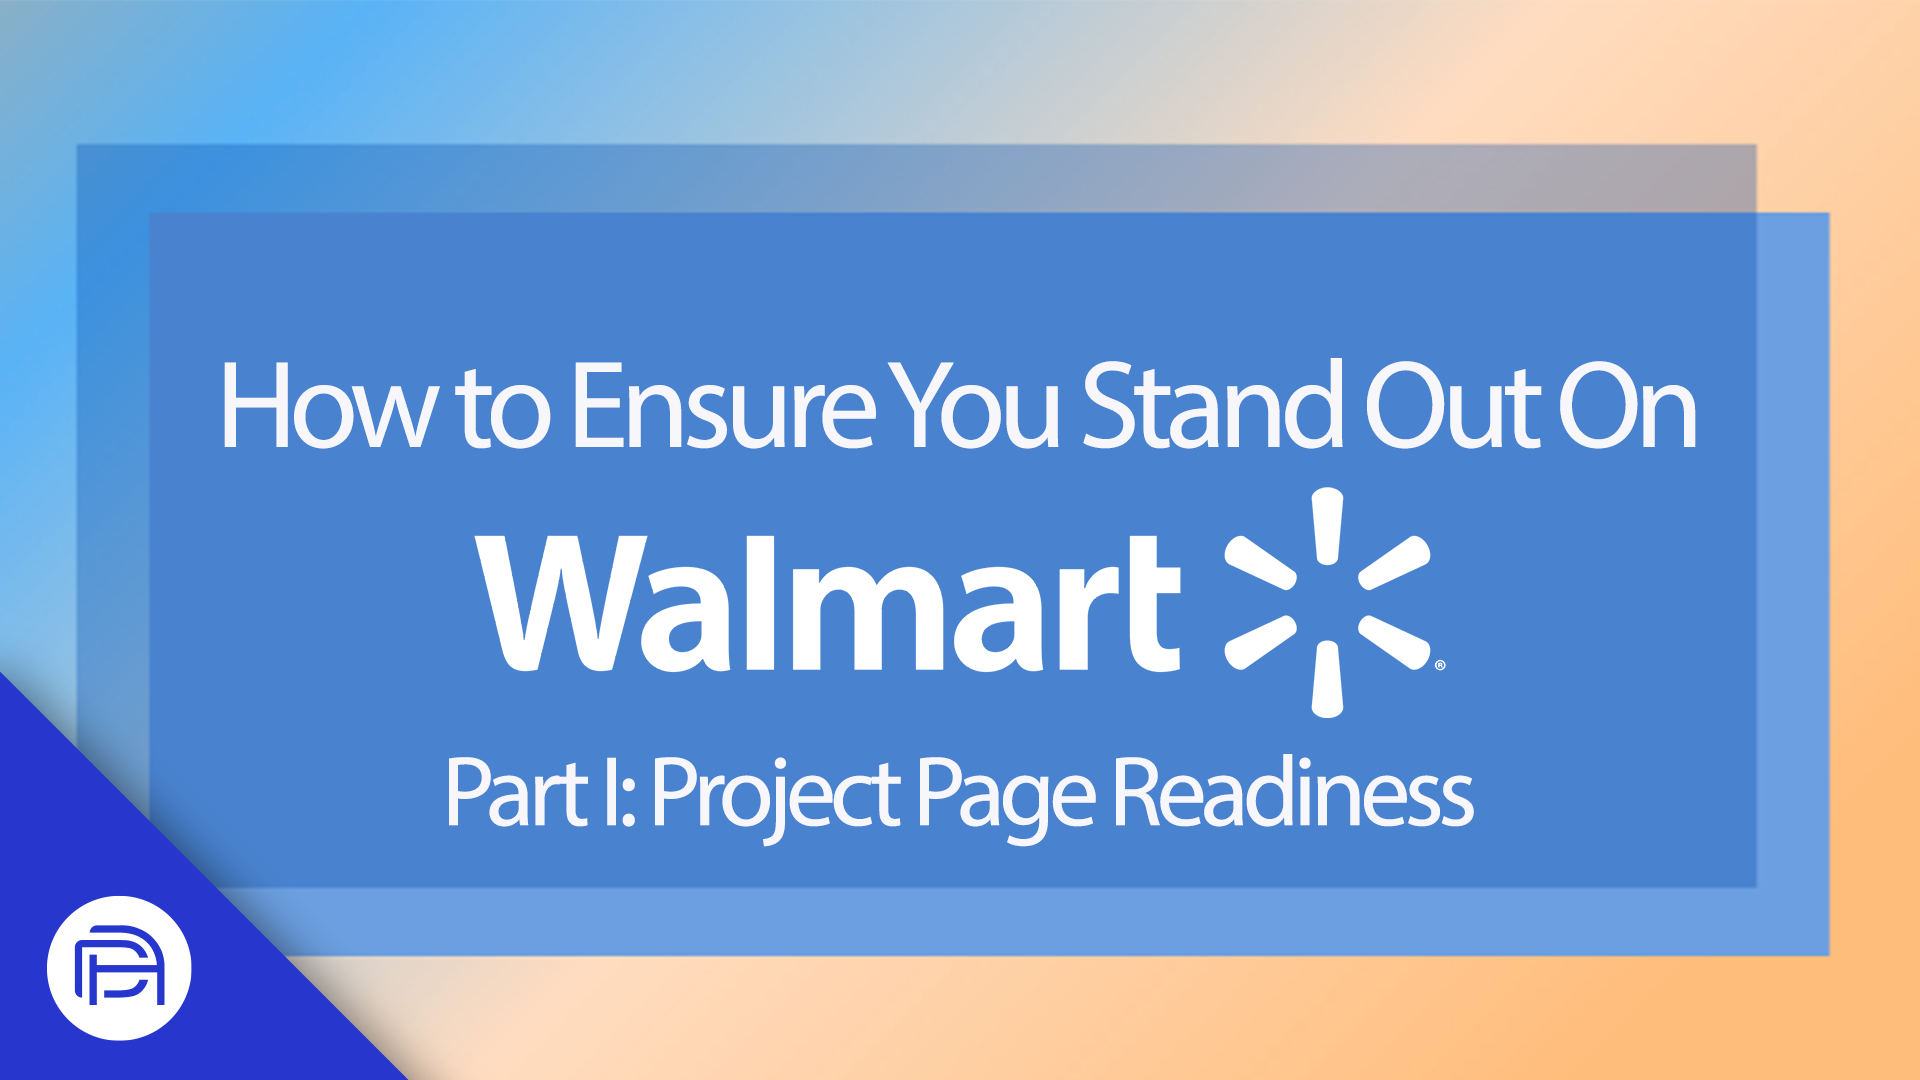 How to Ensure you Stand out on Walmart Marketplace (Part 1: Project Page Readiness)